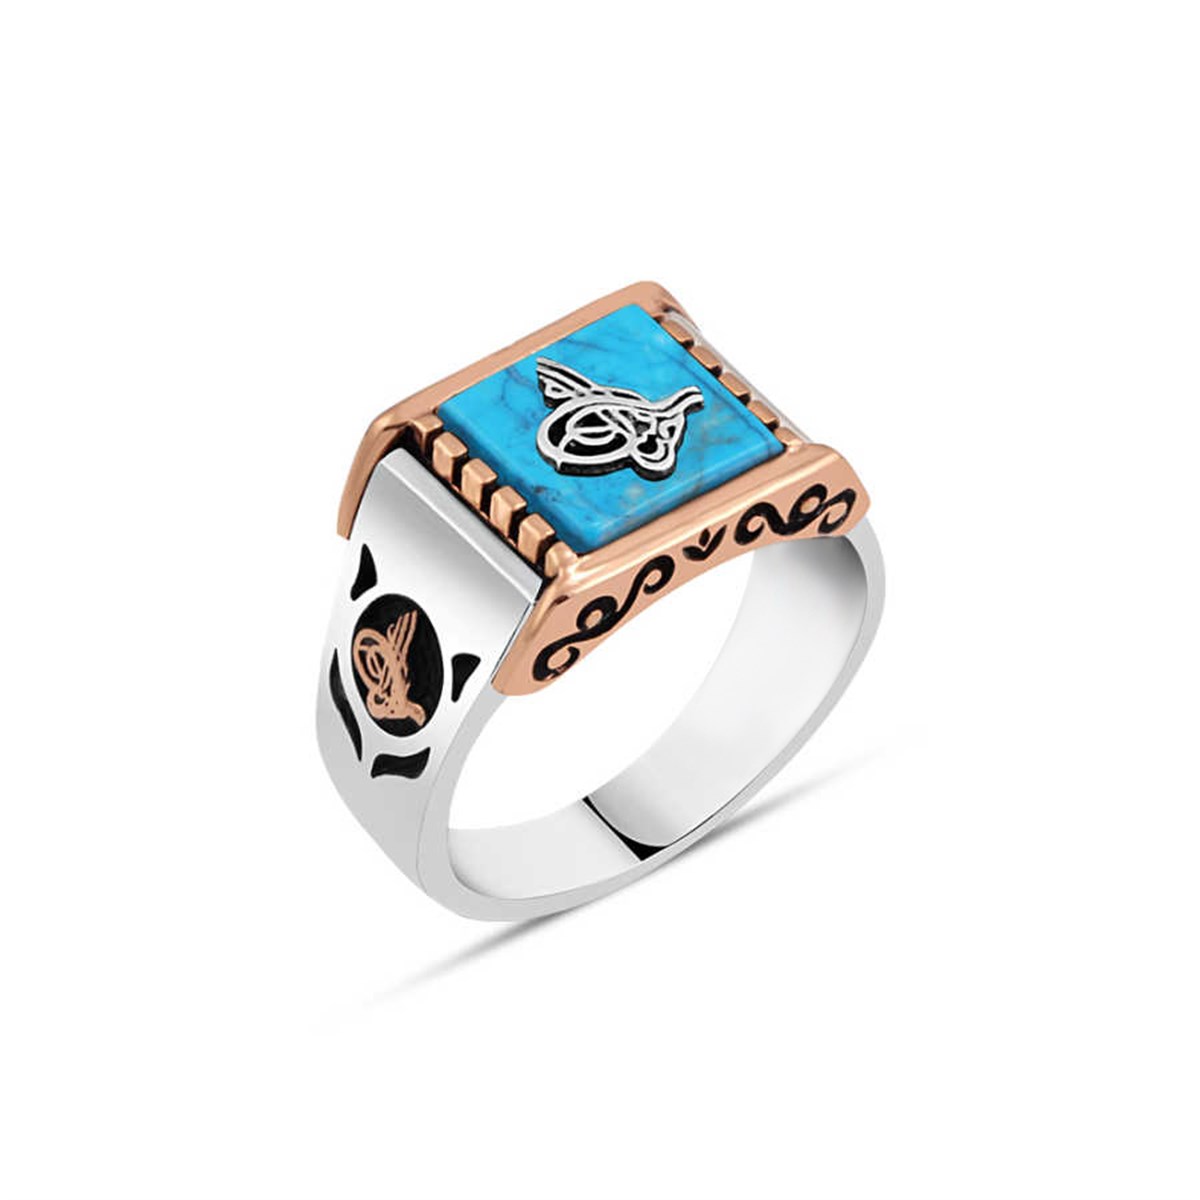 Squeezed Turquoise Stone and Tugra Men's Ring